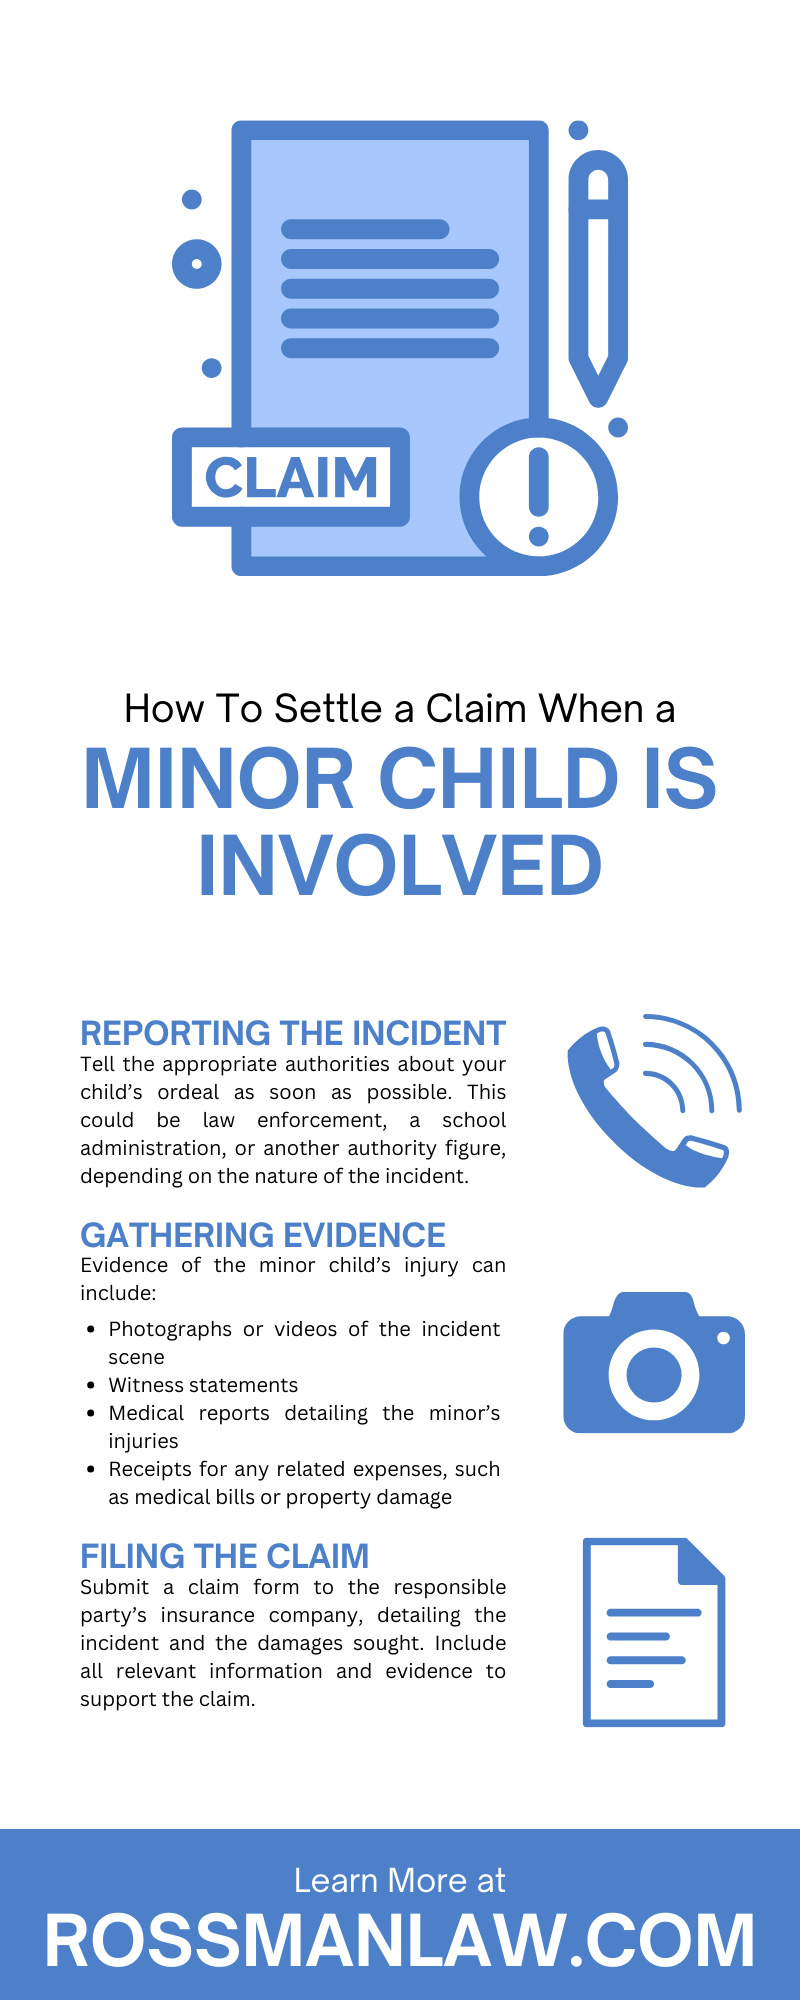 How To Settle a Claim When a Minor Child Is Involved